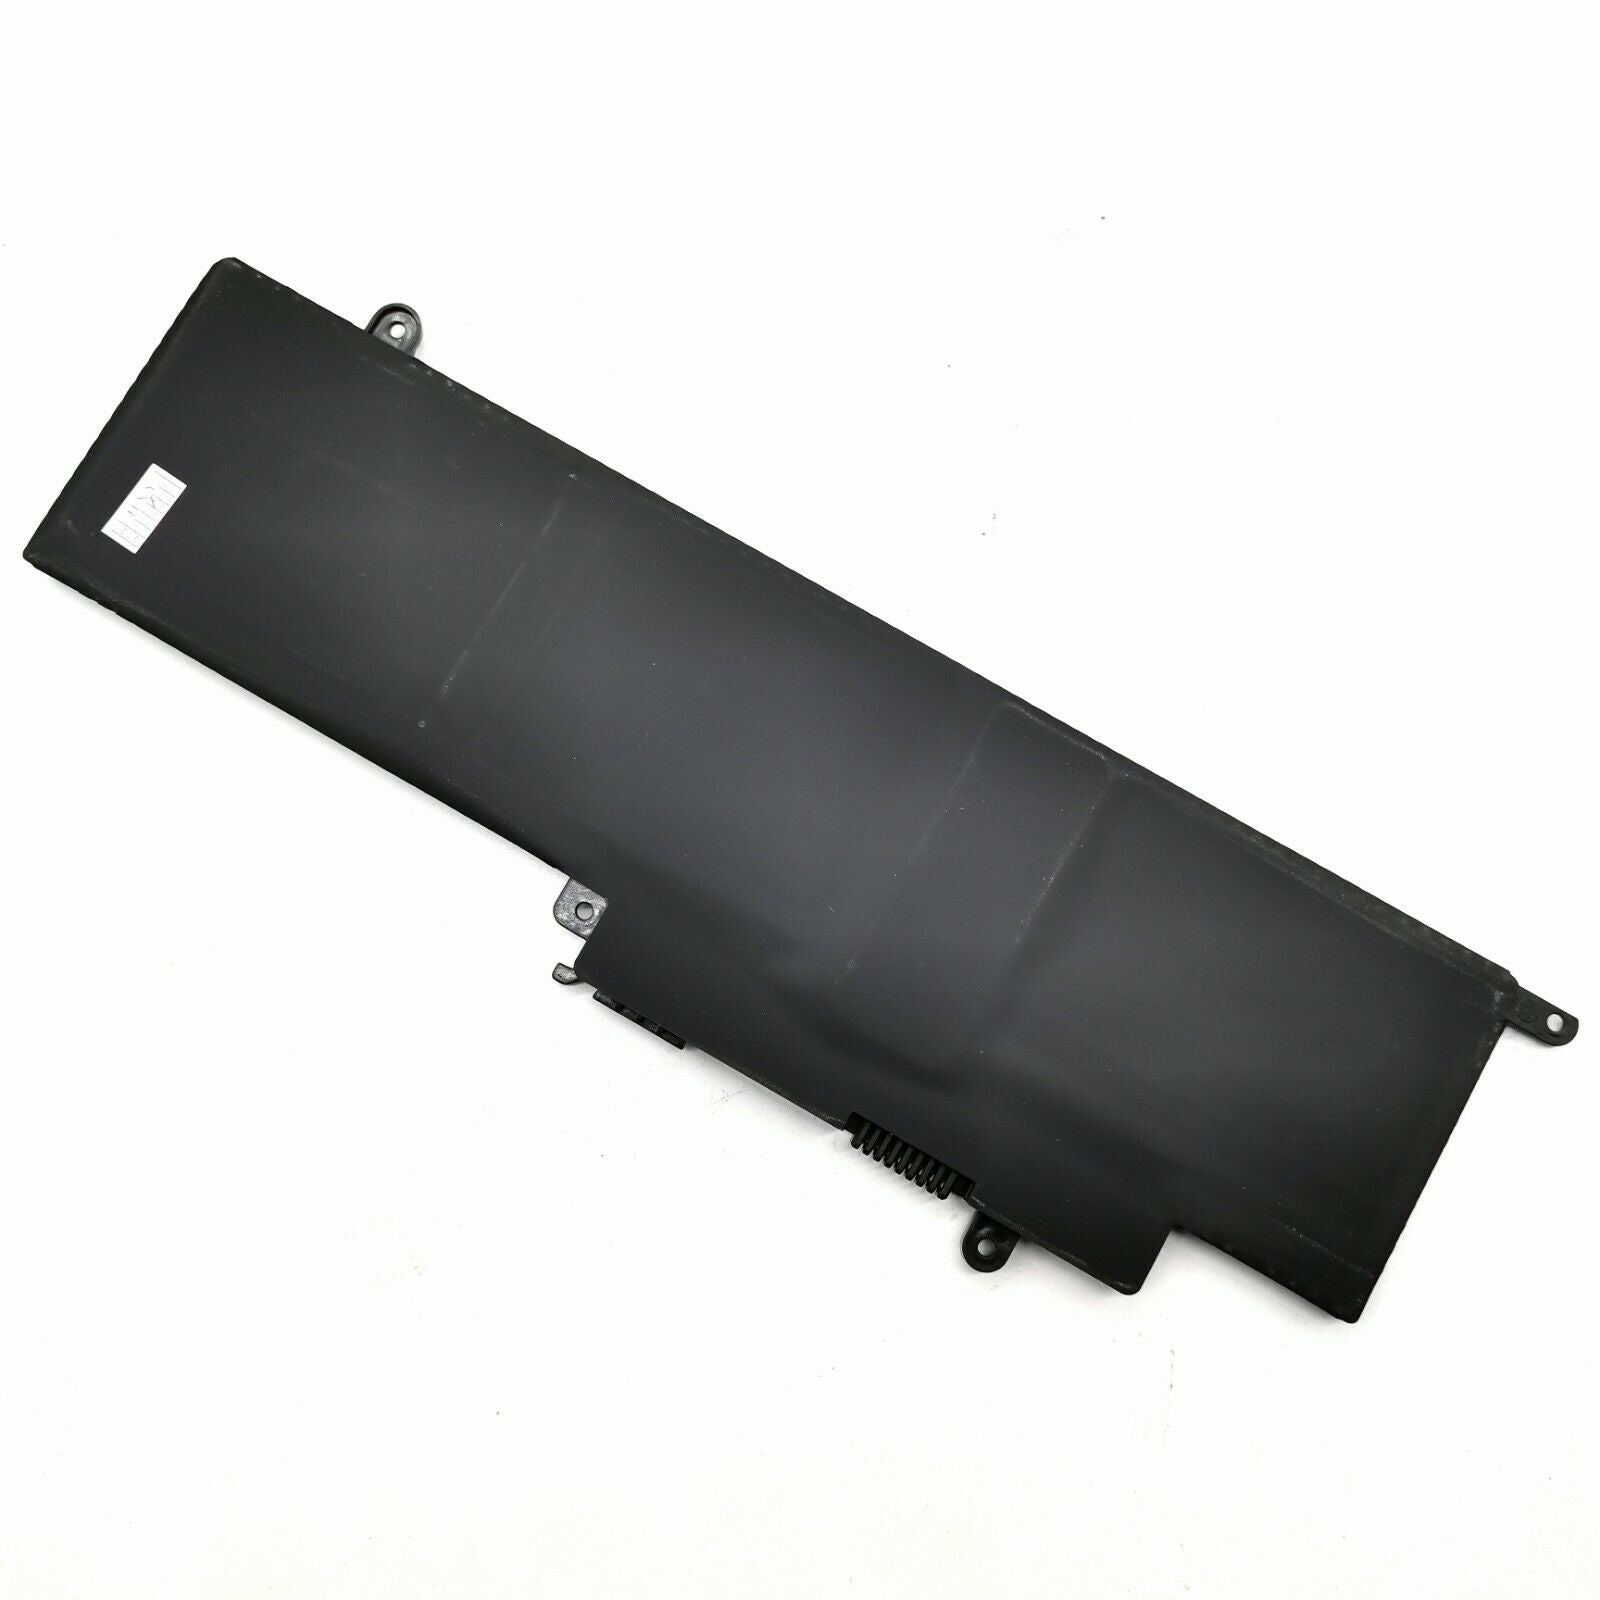 Dell Inspiron 13 7000 11 3000 Series Laptop Battery